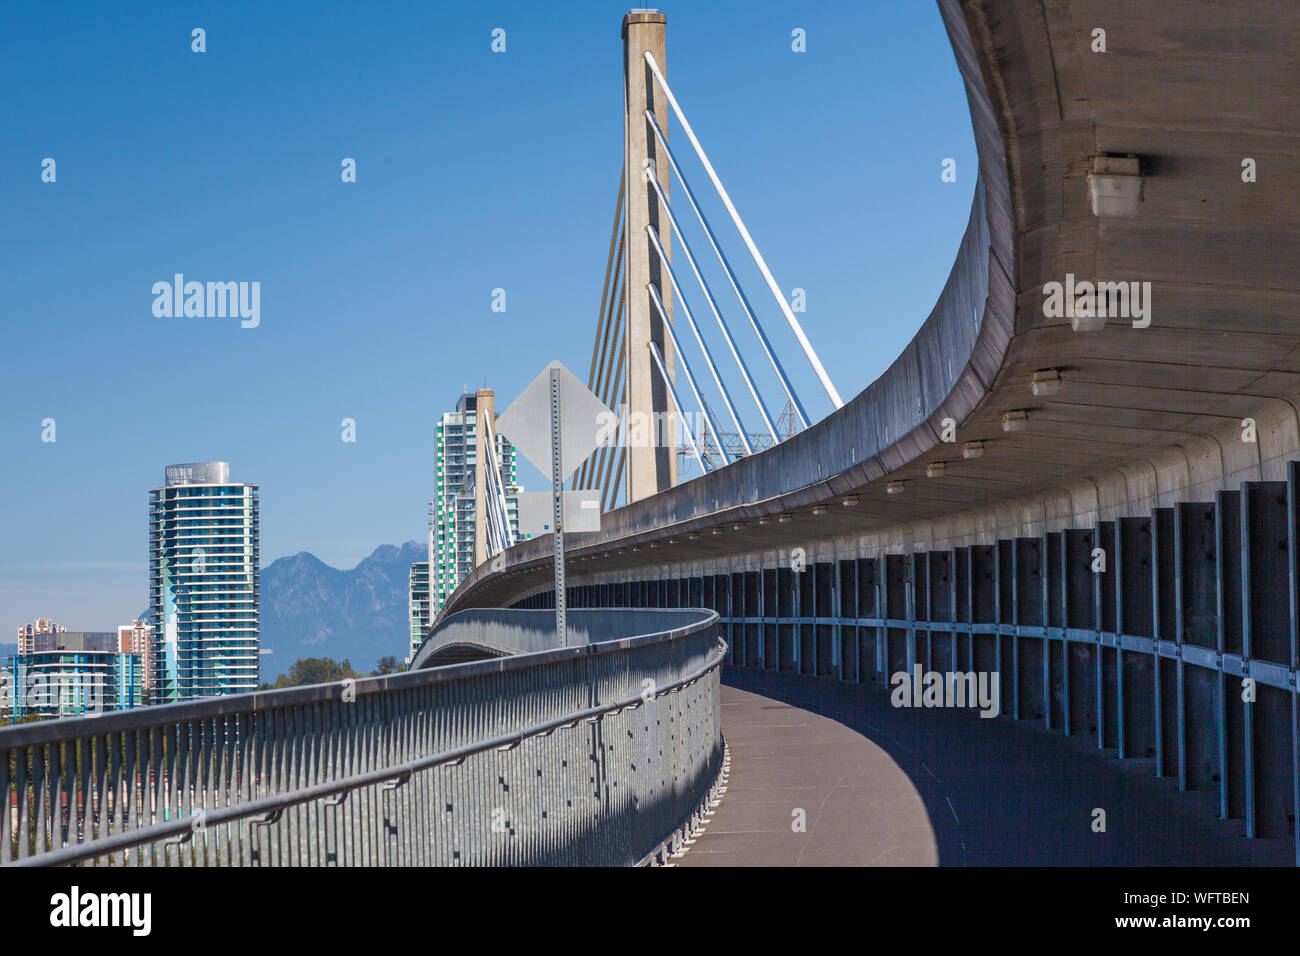 Pedestrian and cycle route attached to the Canada Line transit bridge over the Fraser River in Vancouver Canada Stock Photo